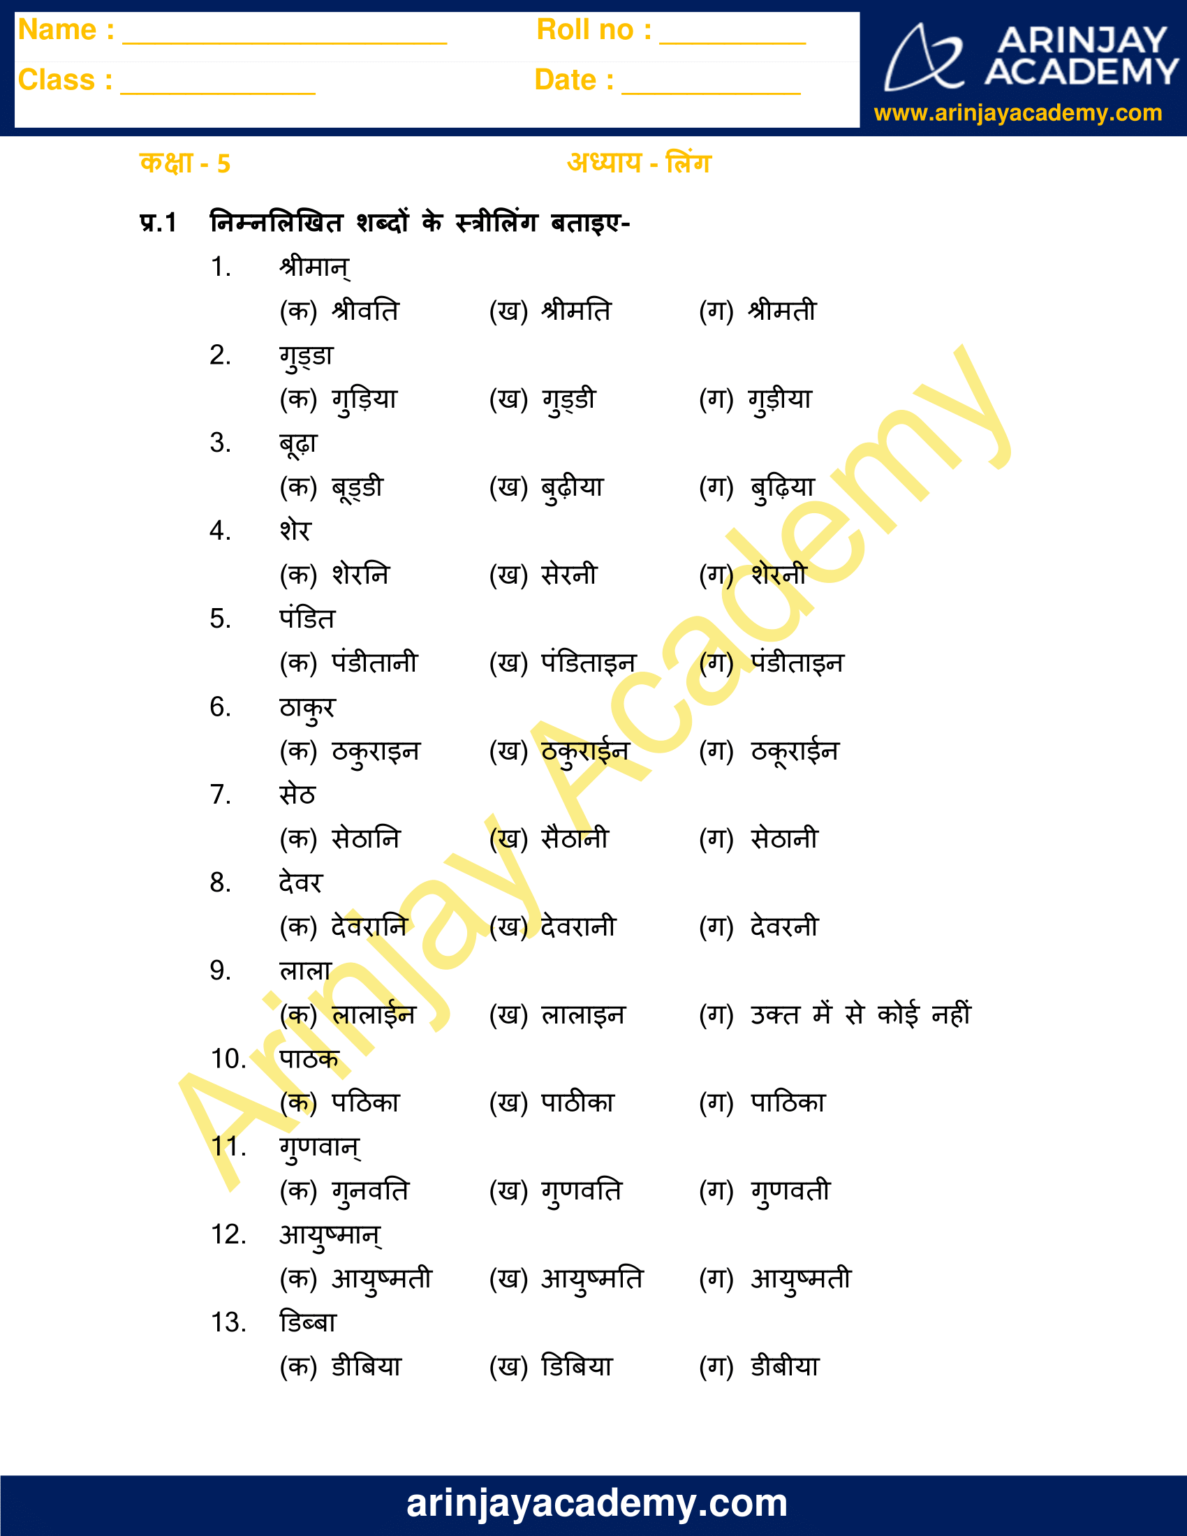 ling-in-hindi-class-5-worksheet-free-and-printable-arinjay-academy